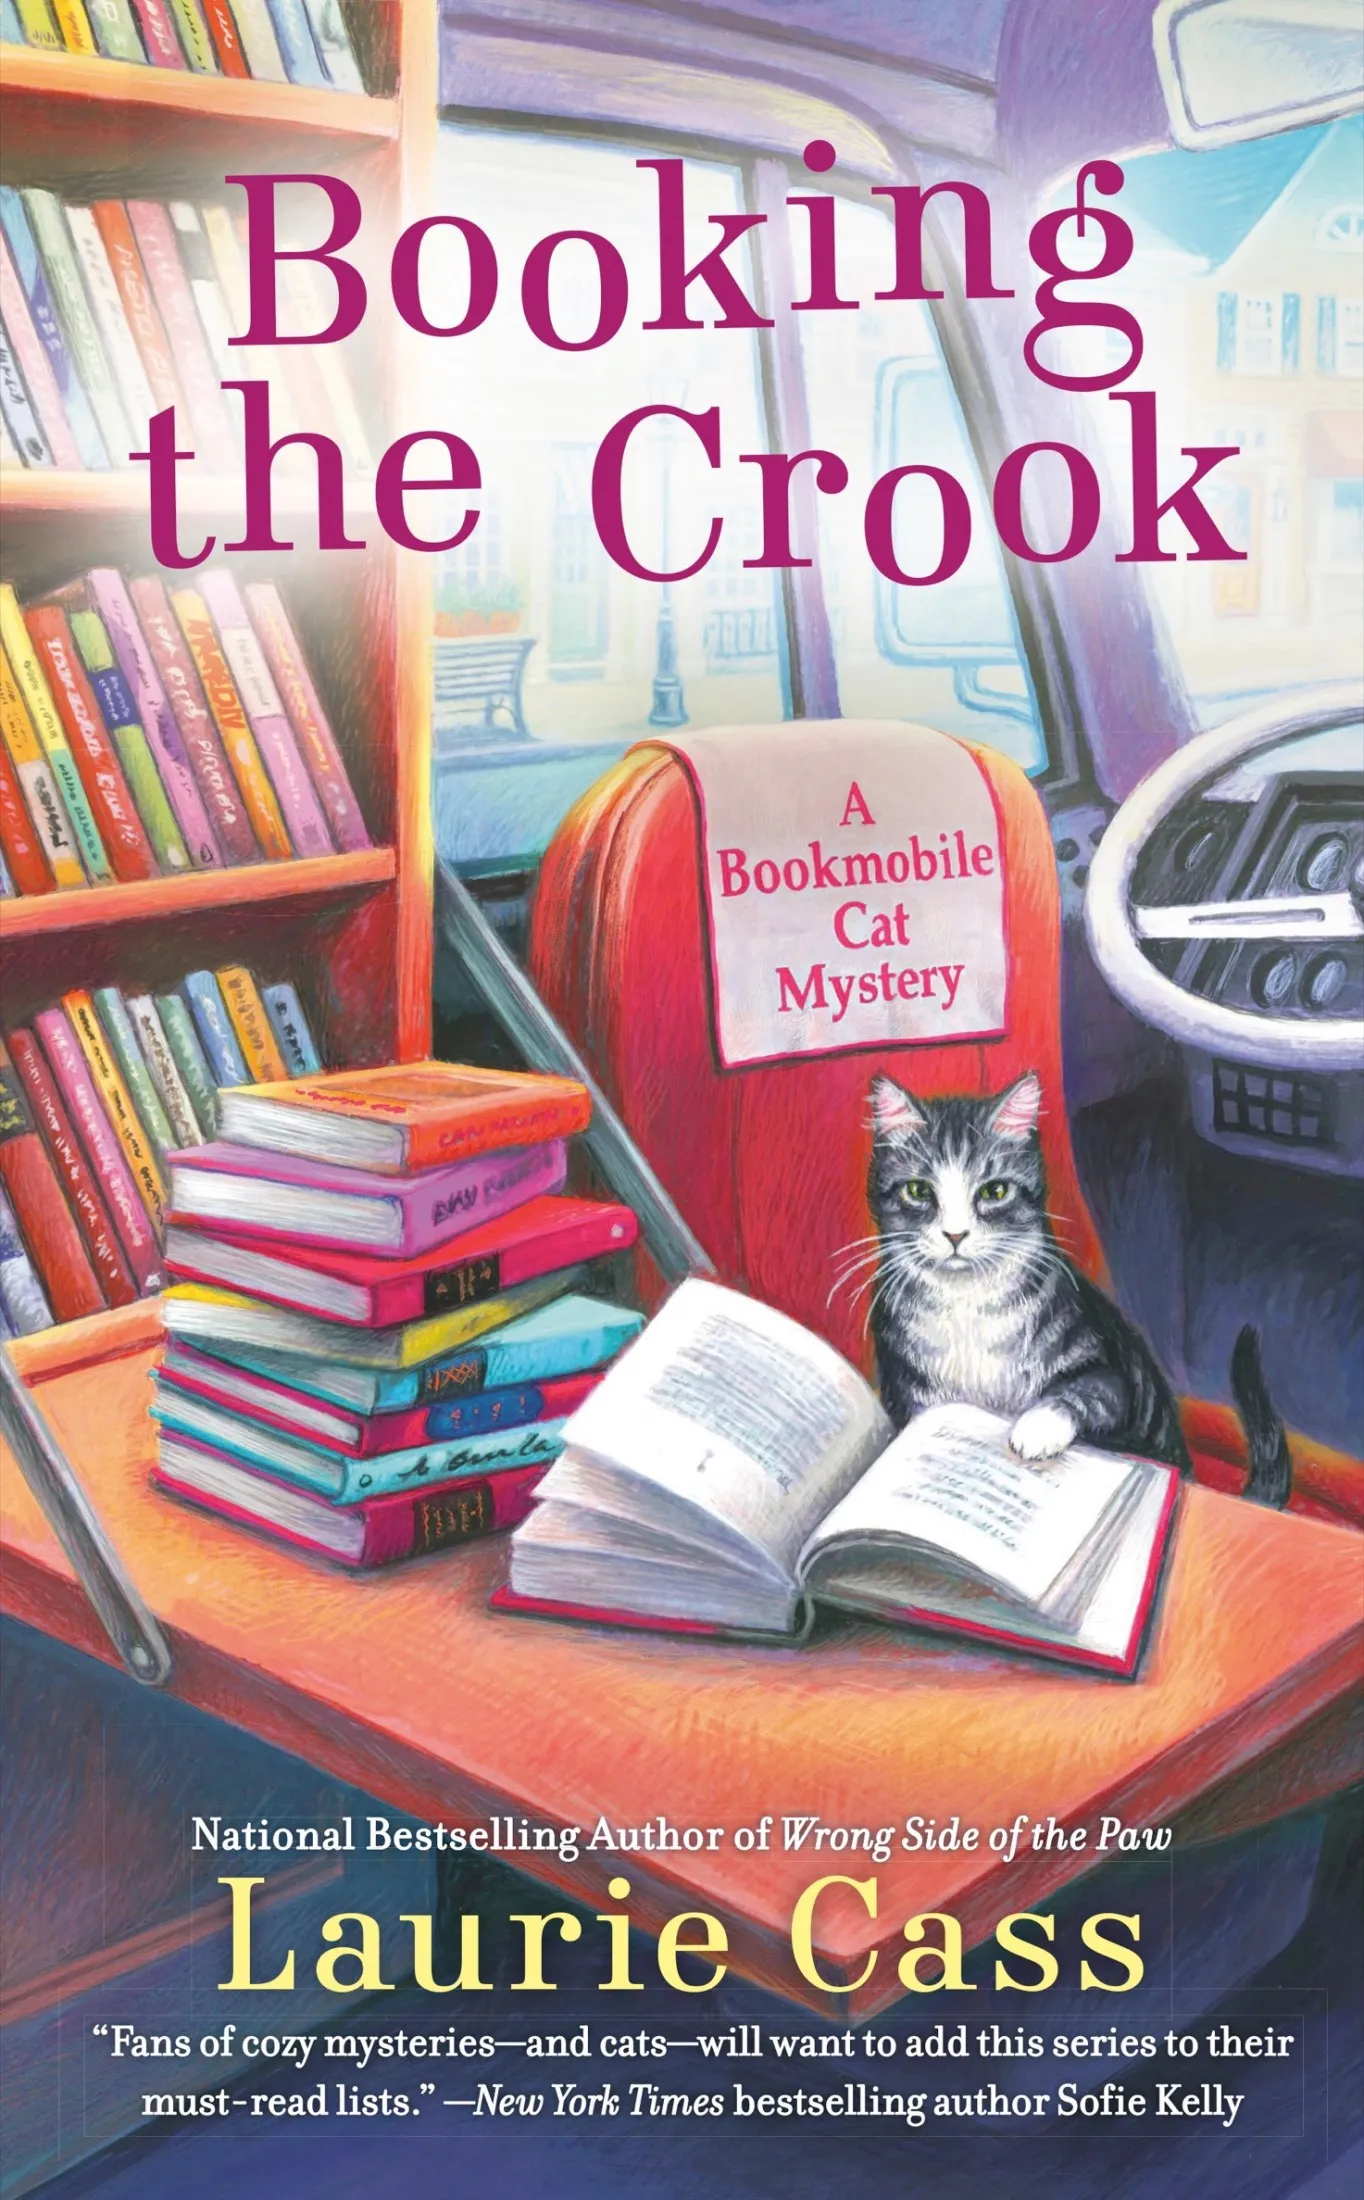 Booking the Crook (A Bookmobile Cat Mystery #7)